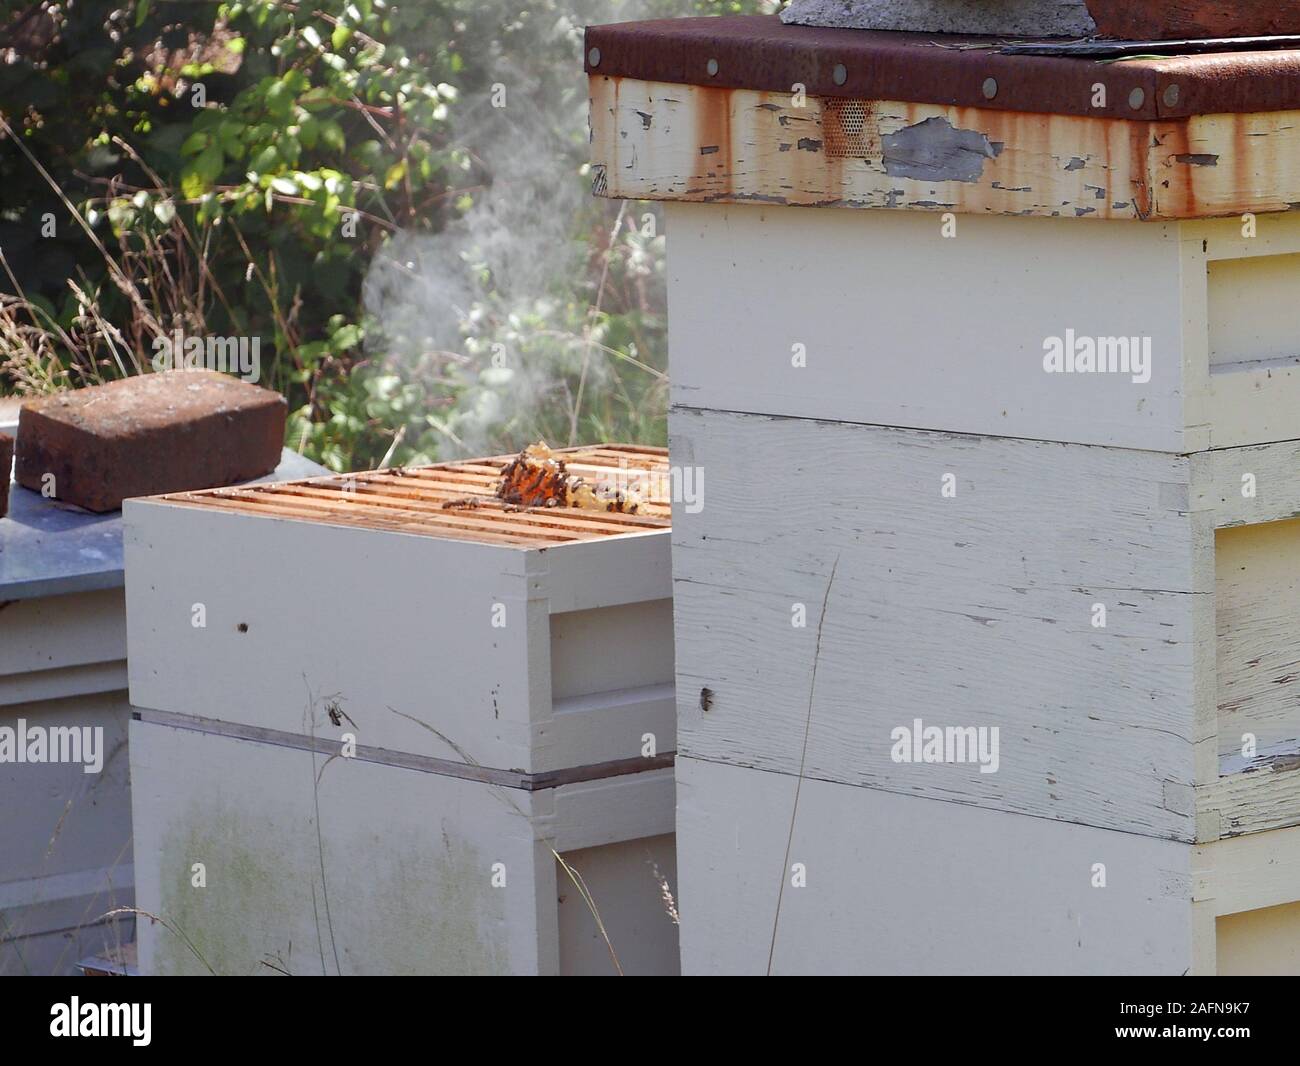 Two Beehives with one of them being open showing the frames with bees and beeswax visible and smoke nearby Stock Photo